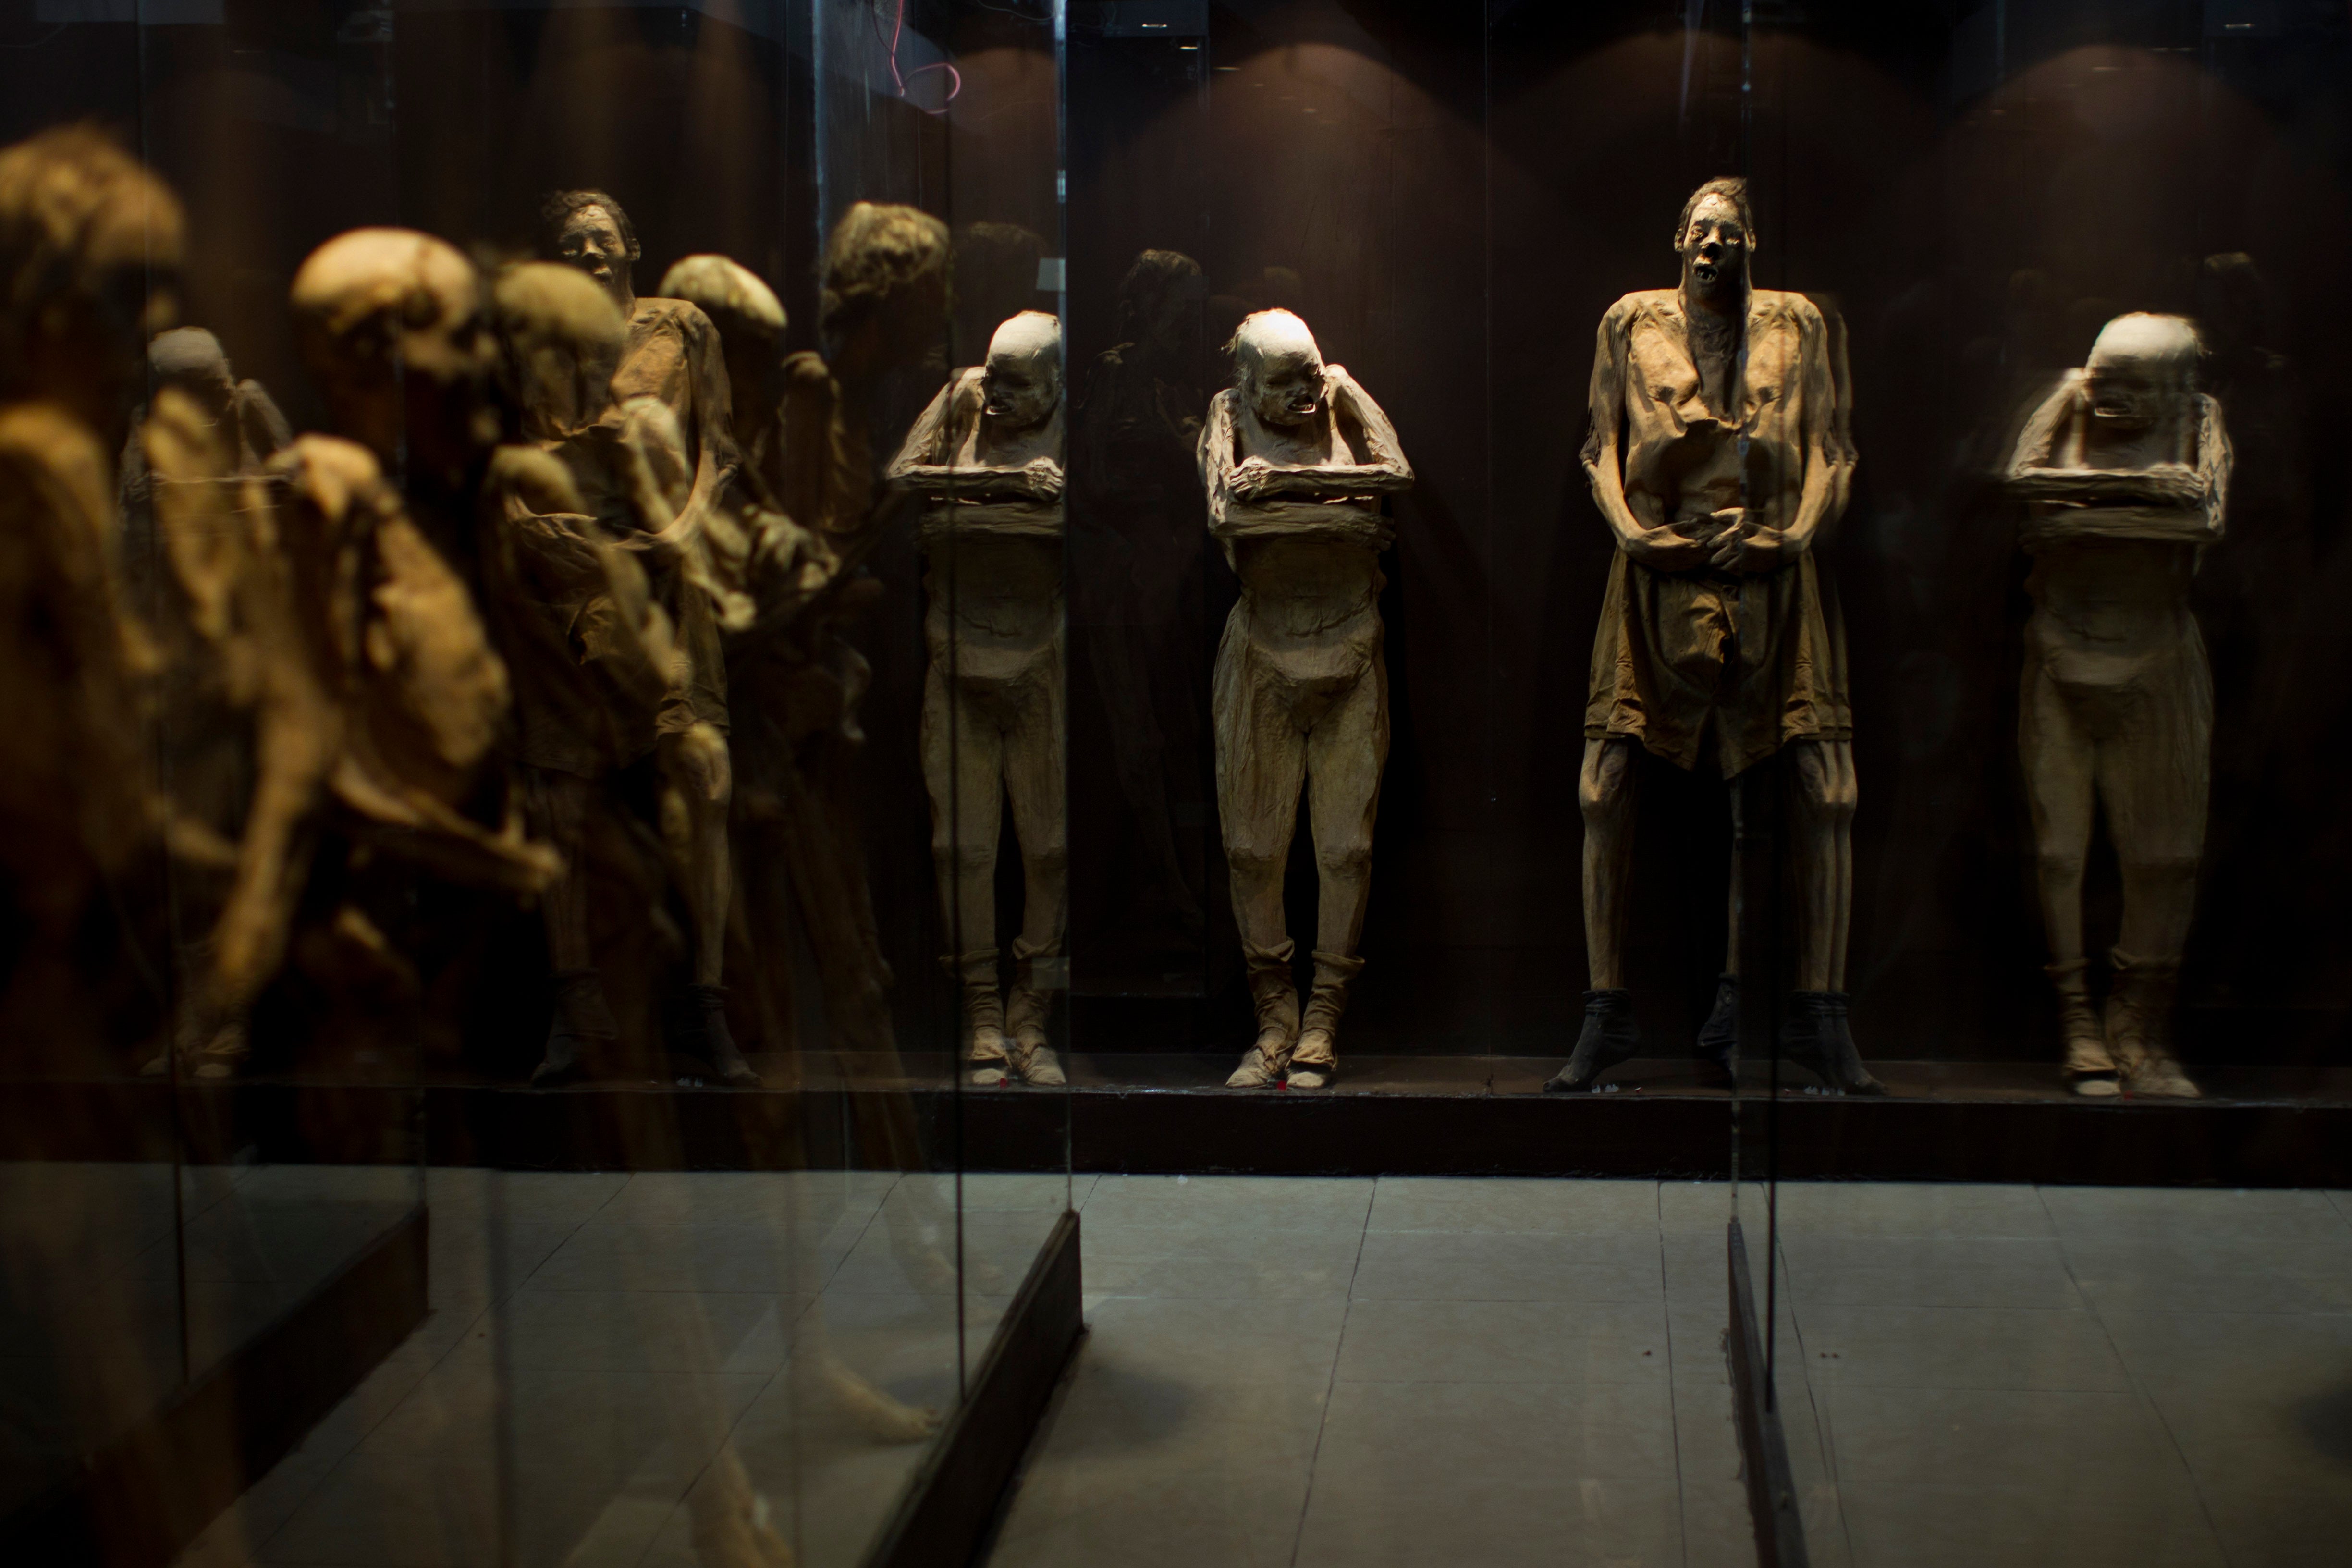 Mummies are displayed inside glass enclosures at the Mummy Museum in the colonial city of Guanajuato, Mexico